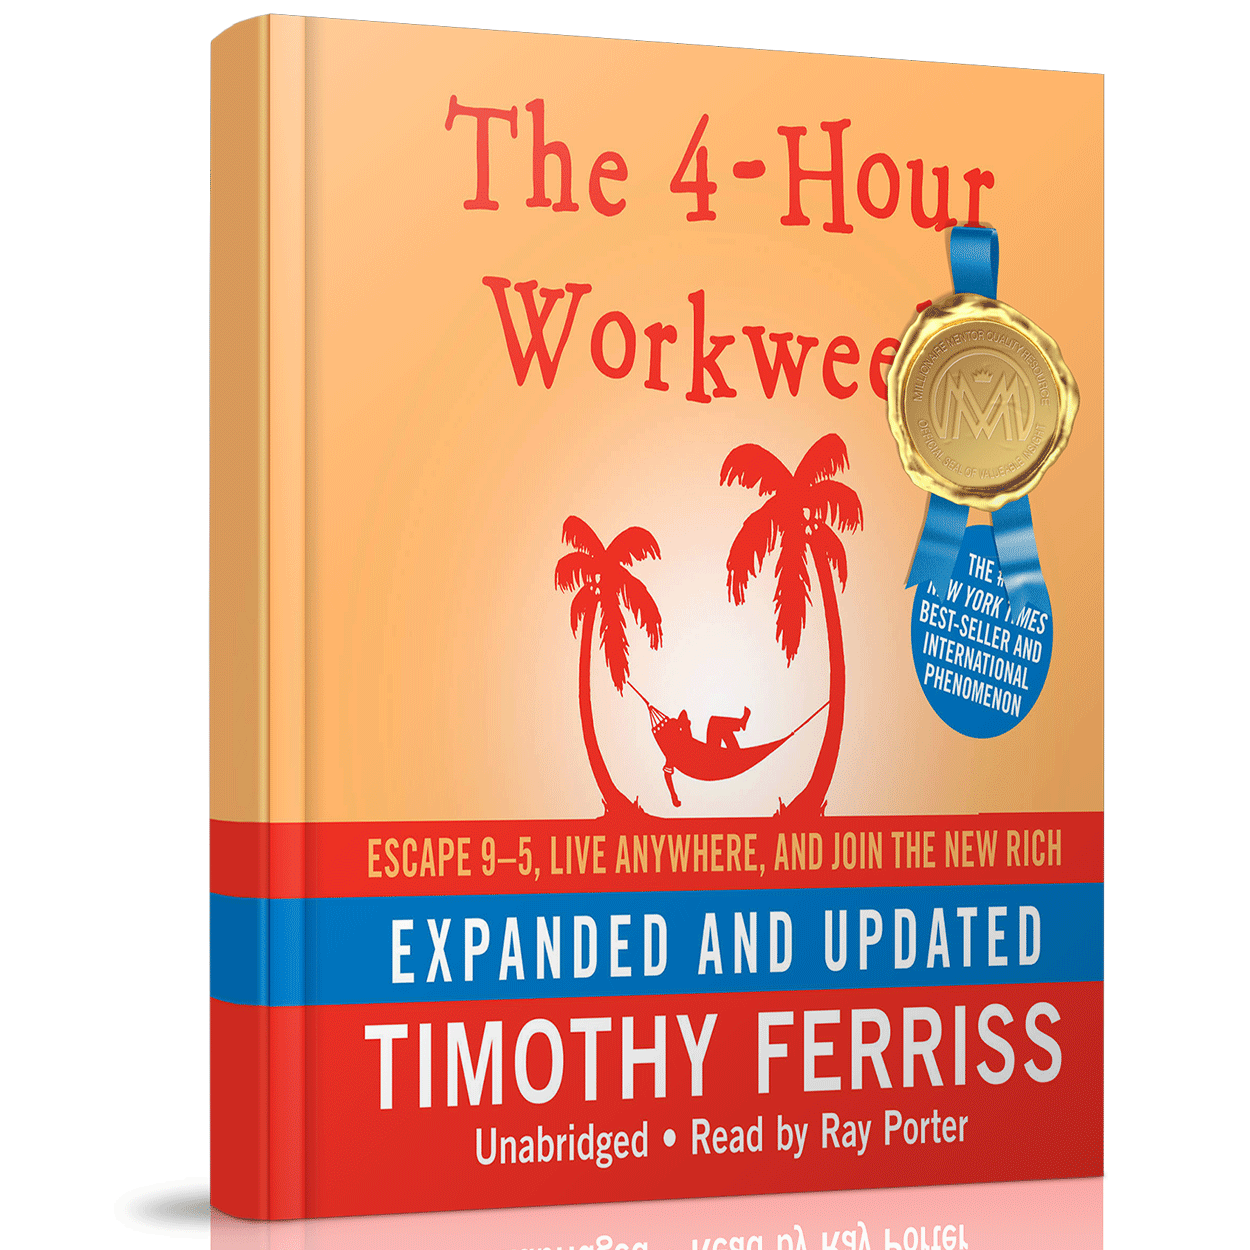 “The 4-Hour Workweek” by Timothy Ferriss